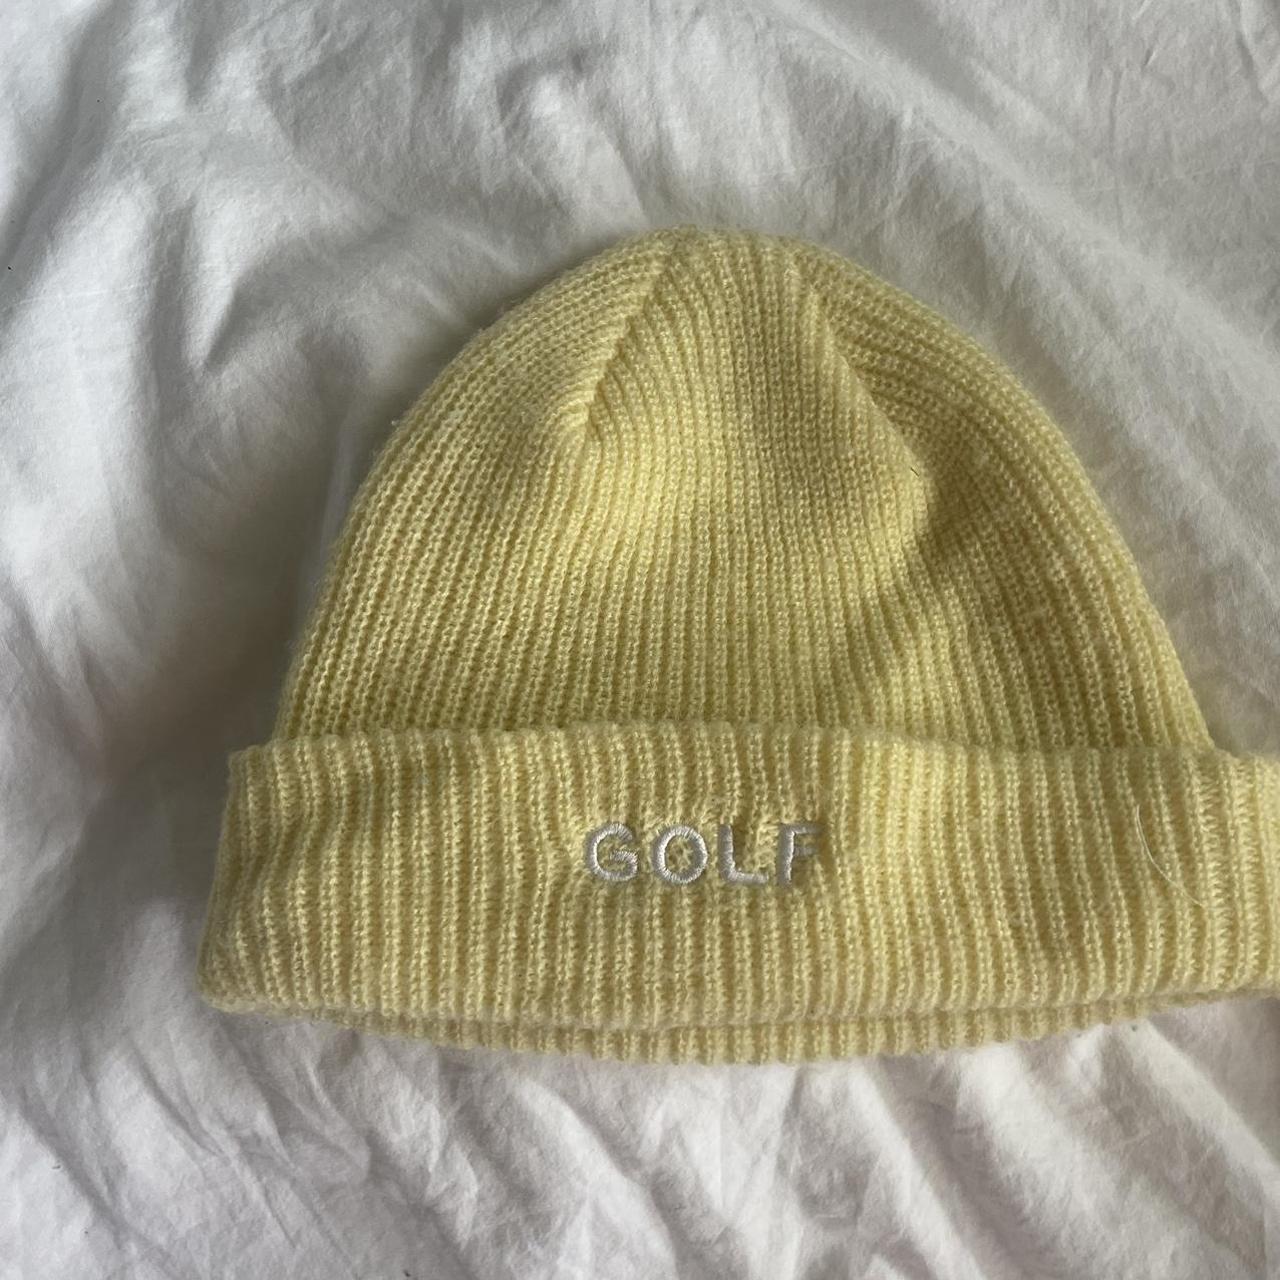 Golf Wang yellow beanie, i bought this on here years